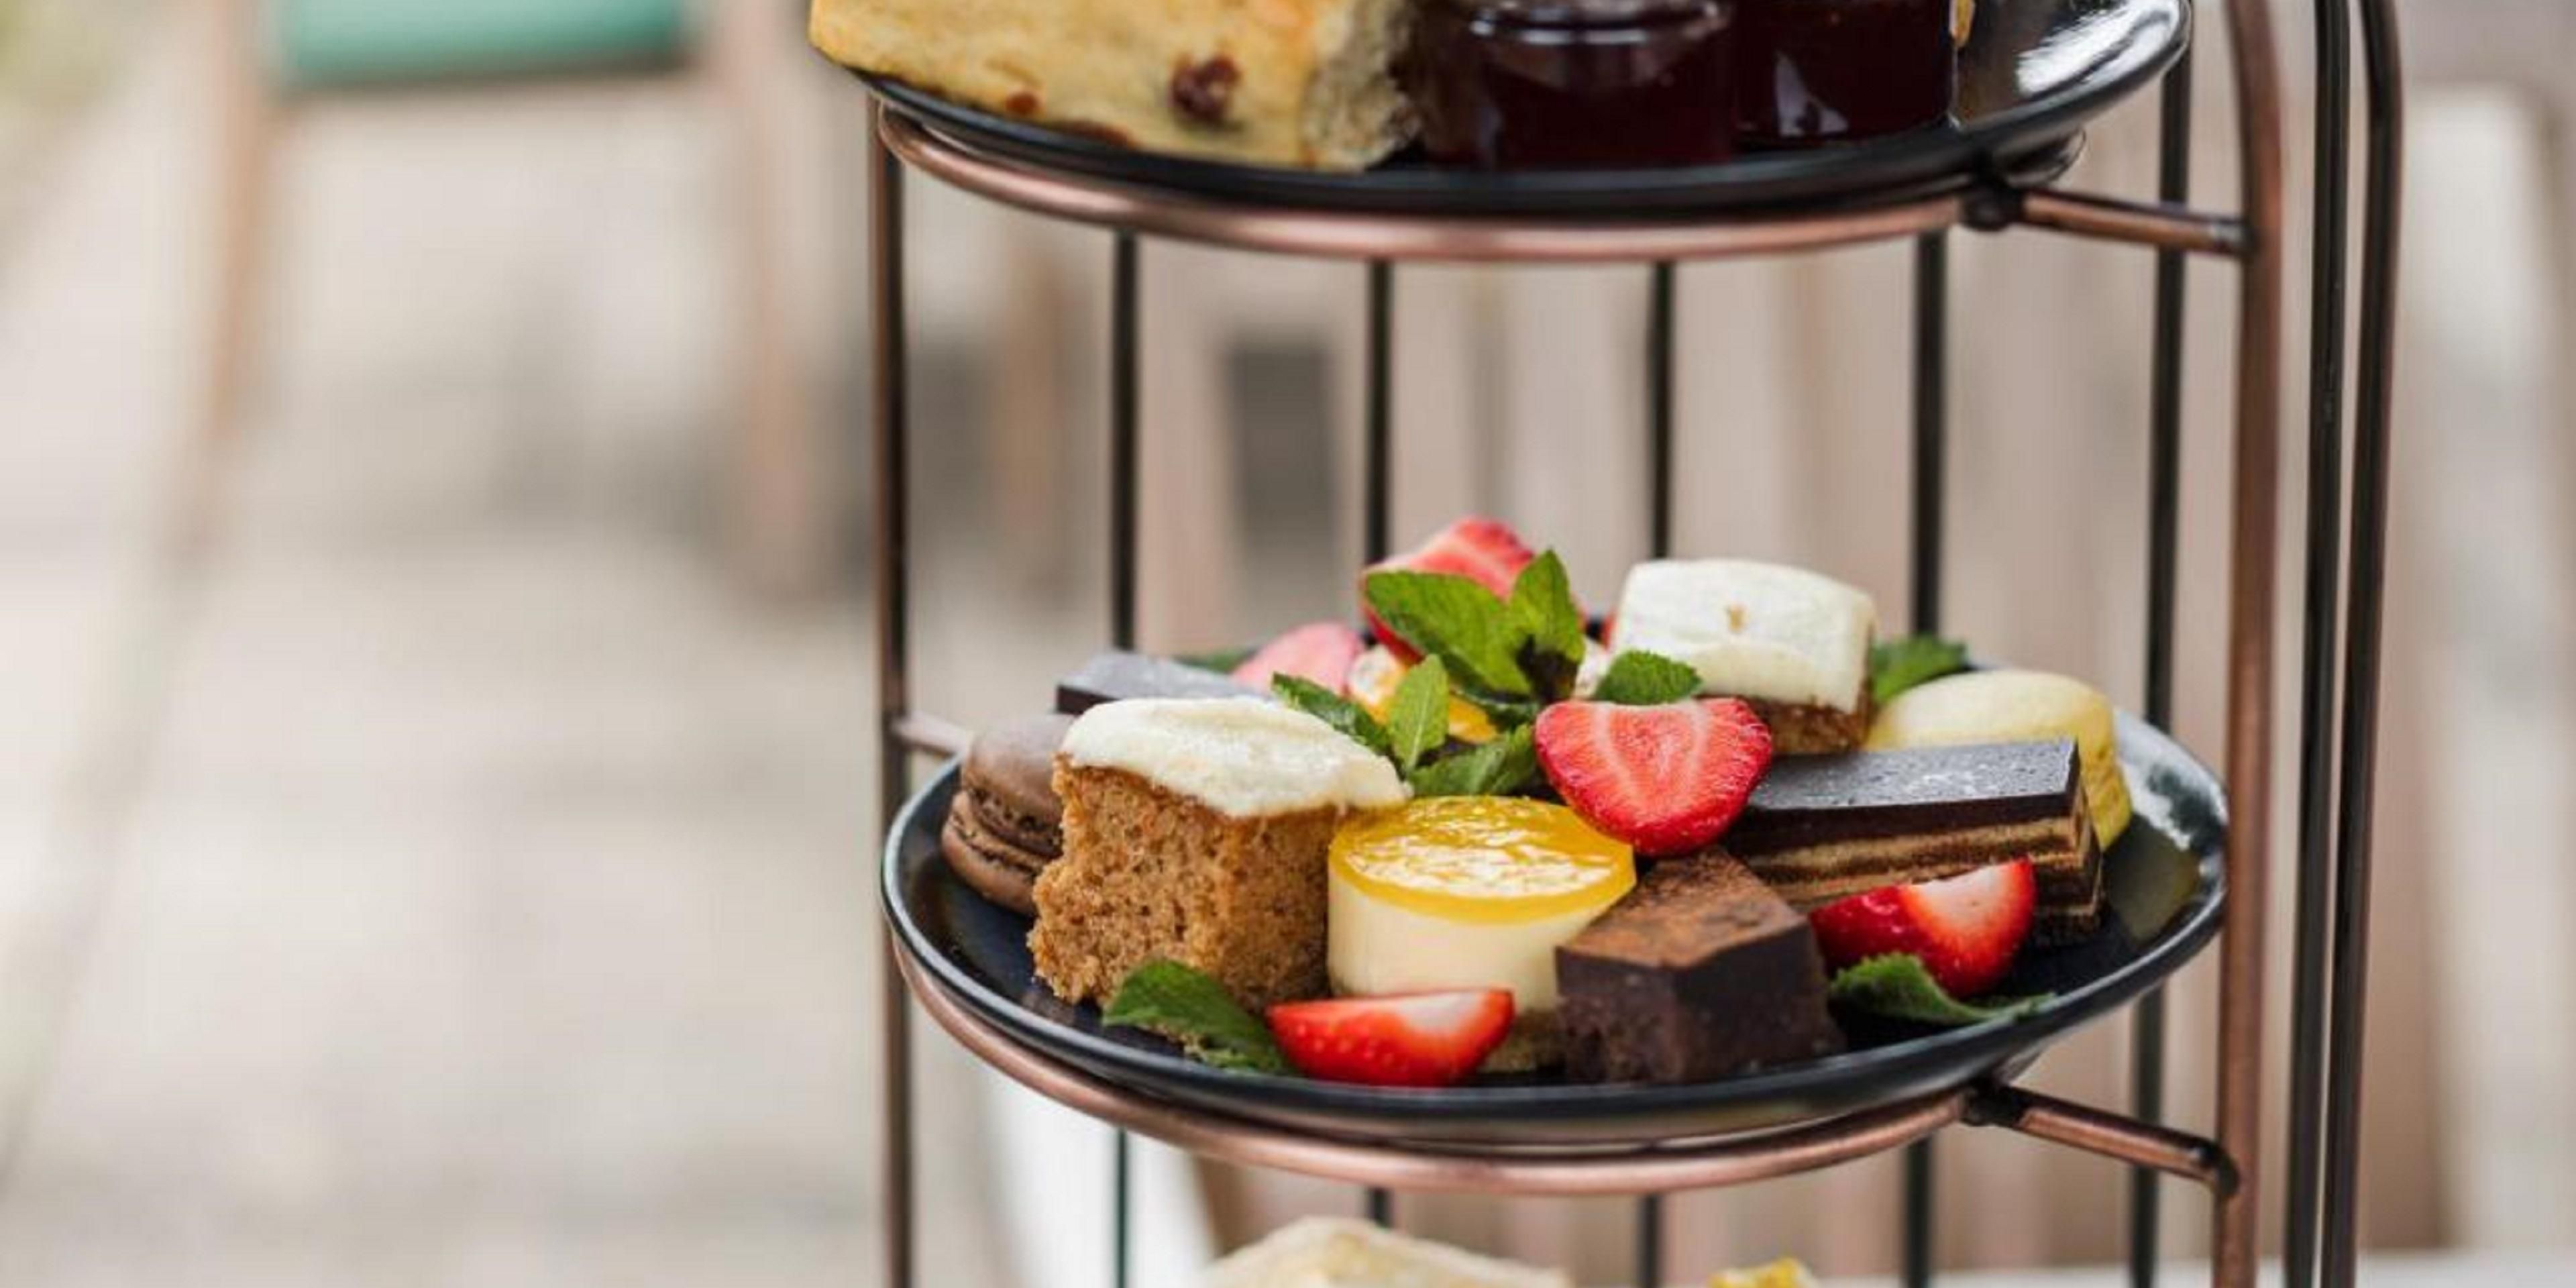 Why not enjoy a delicious afternoon tea when you stay